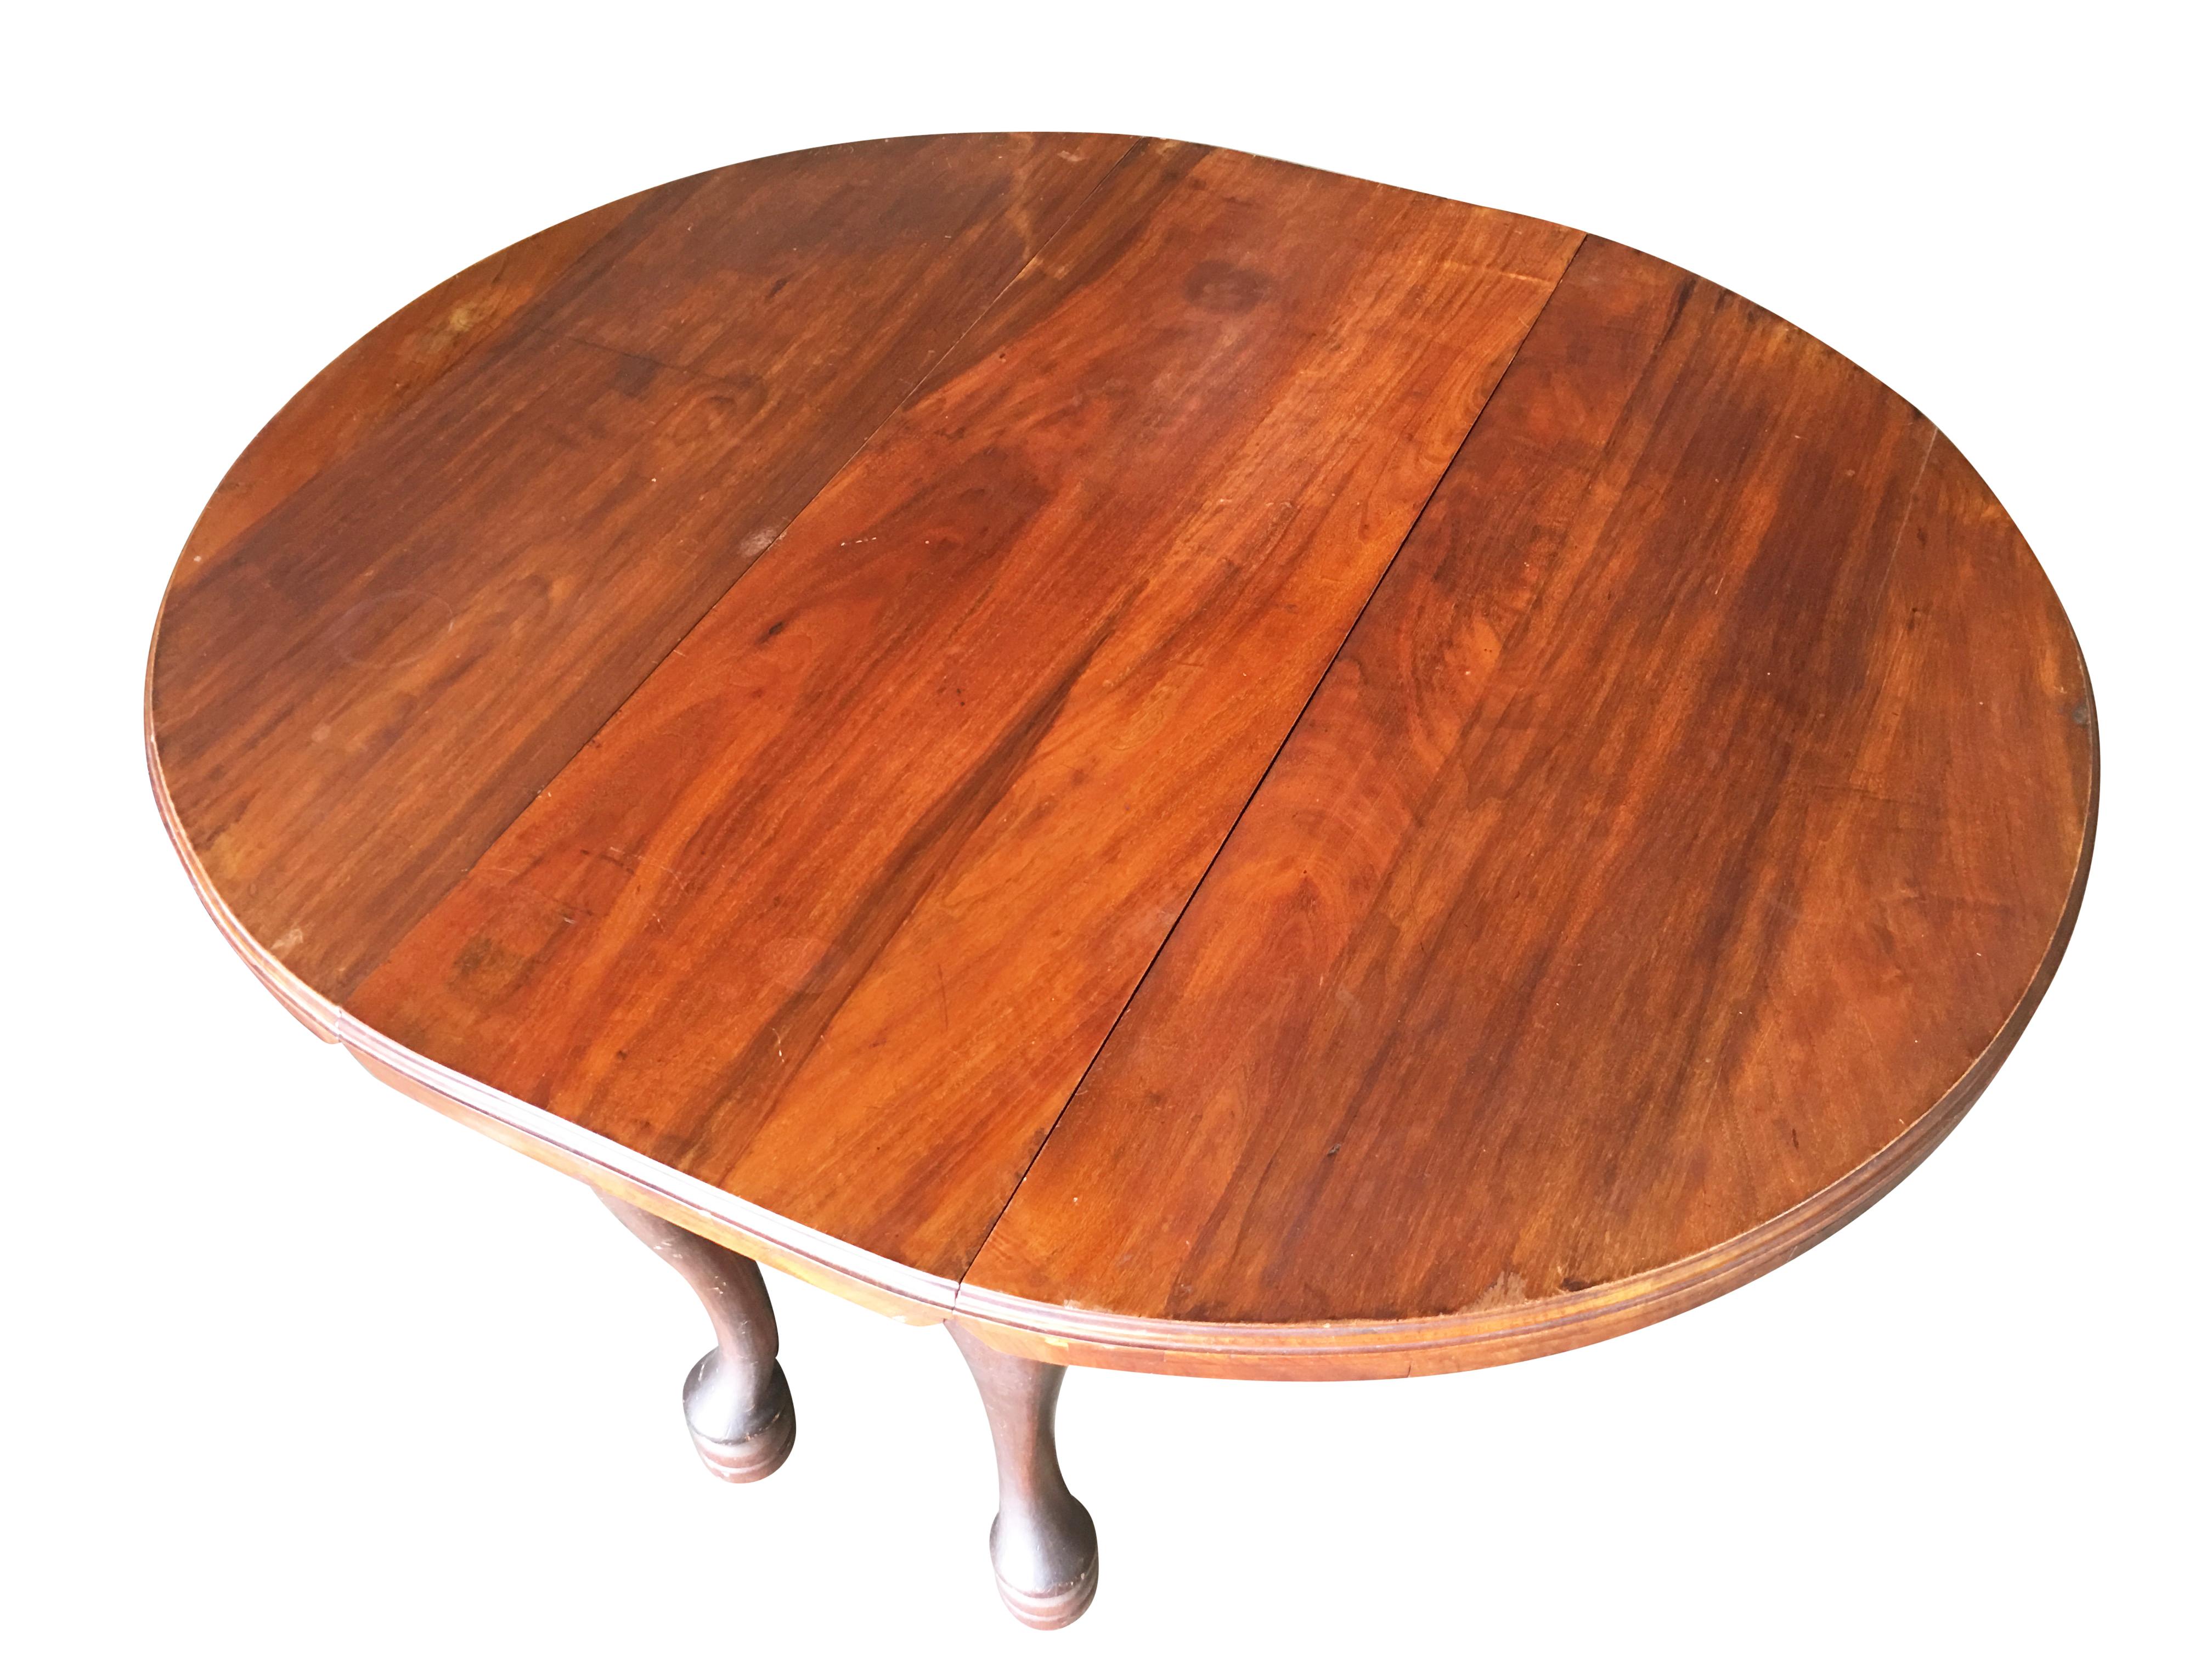 Georgian drop-leaf mahogany dining table featuring an oval top and sculpted legs.